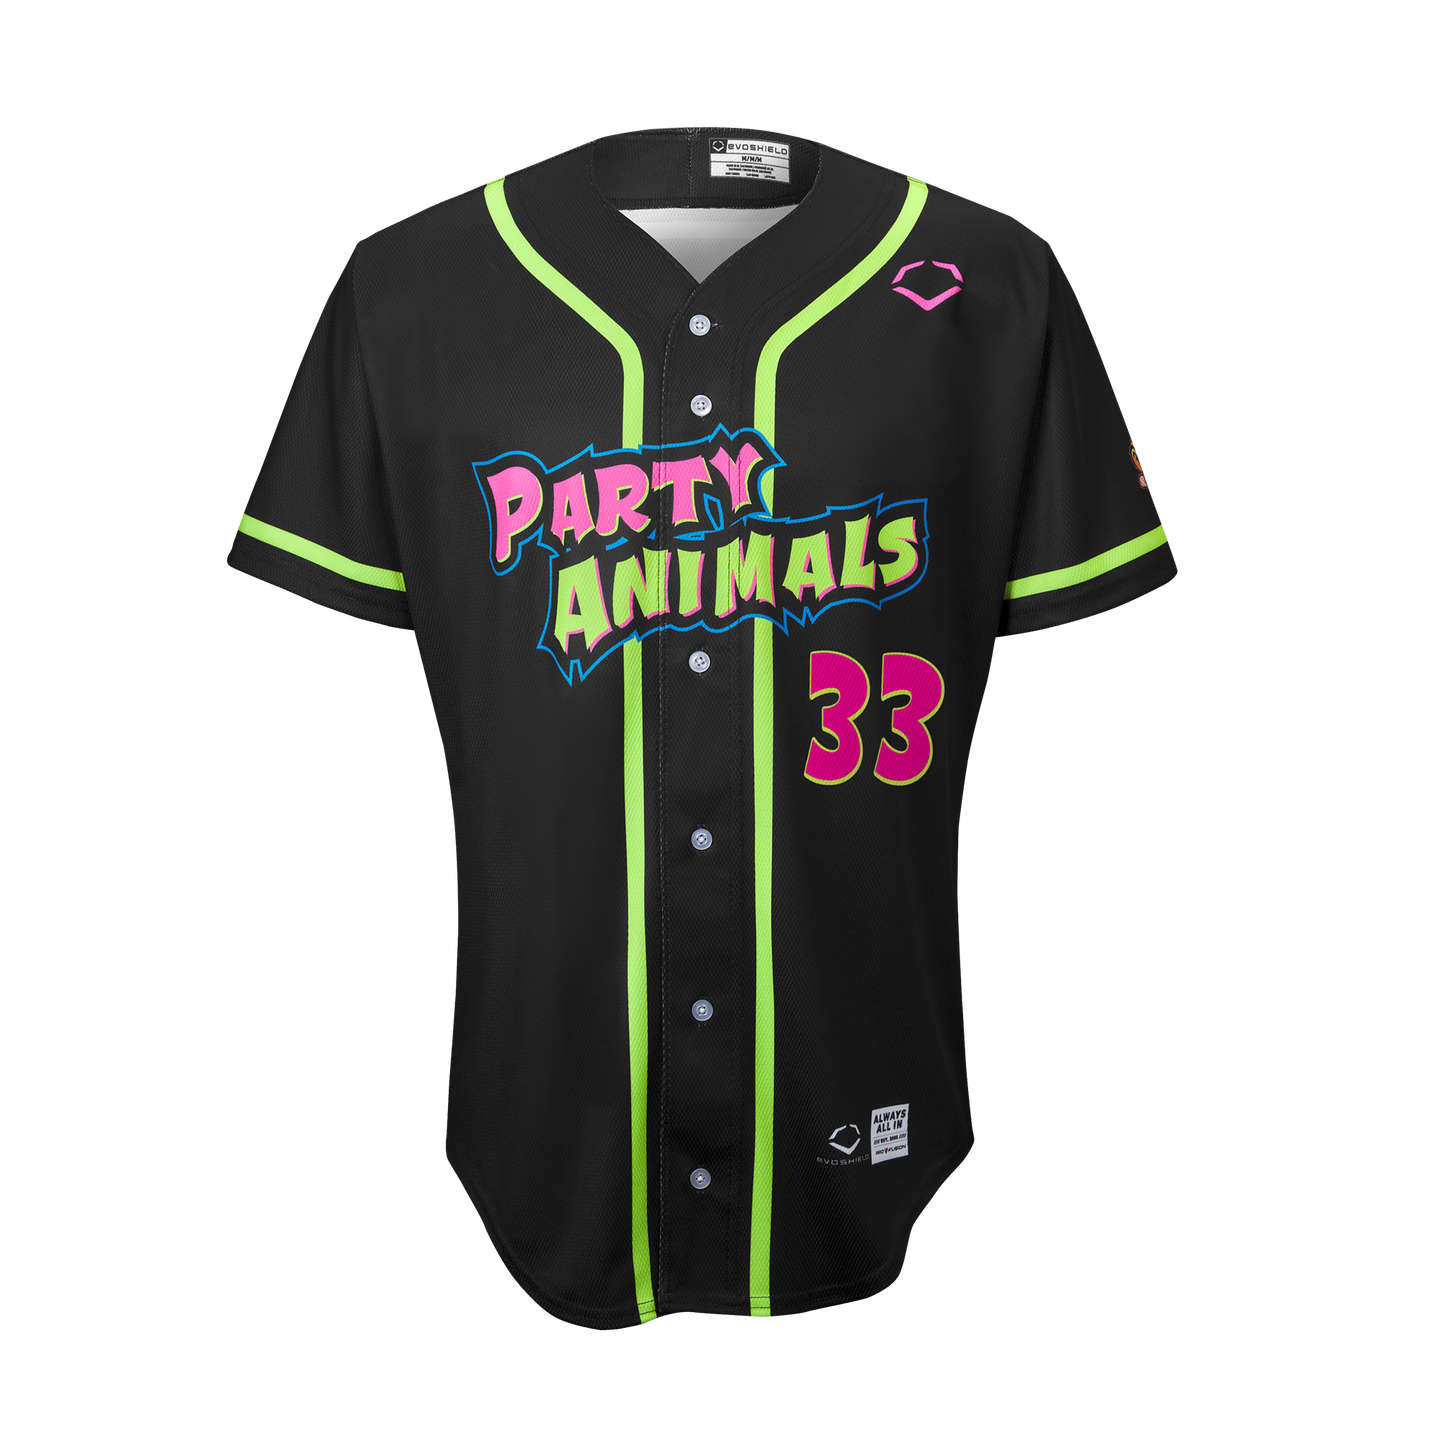 YOUTH Party Animals Connor Higgins #33 EvoShield Jersey - Black